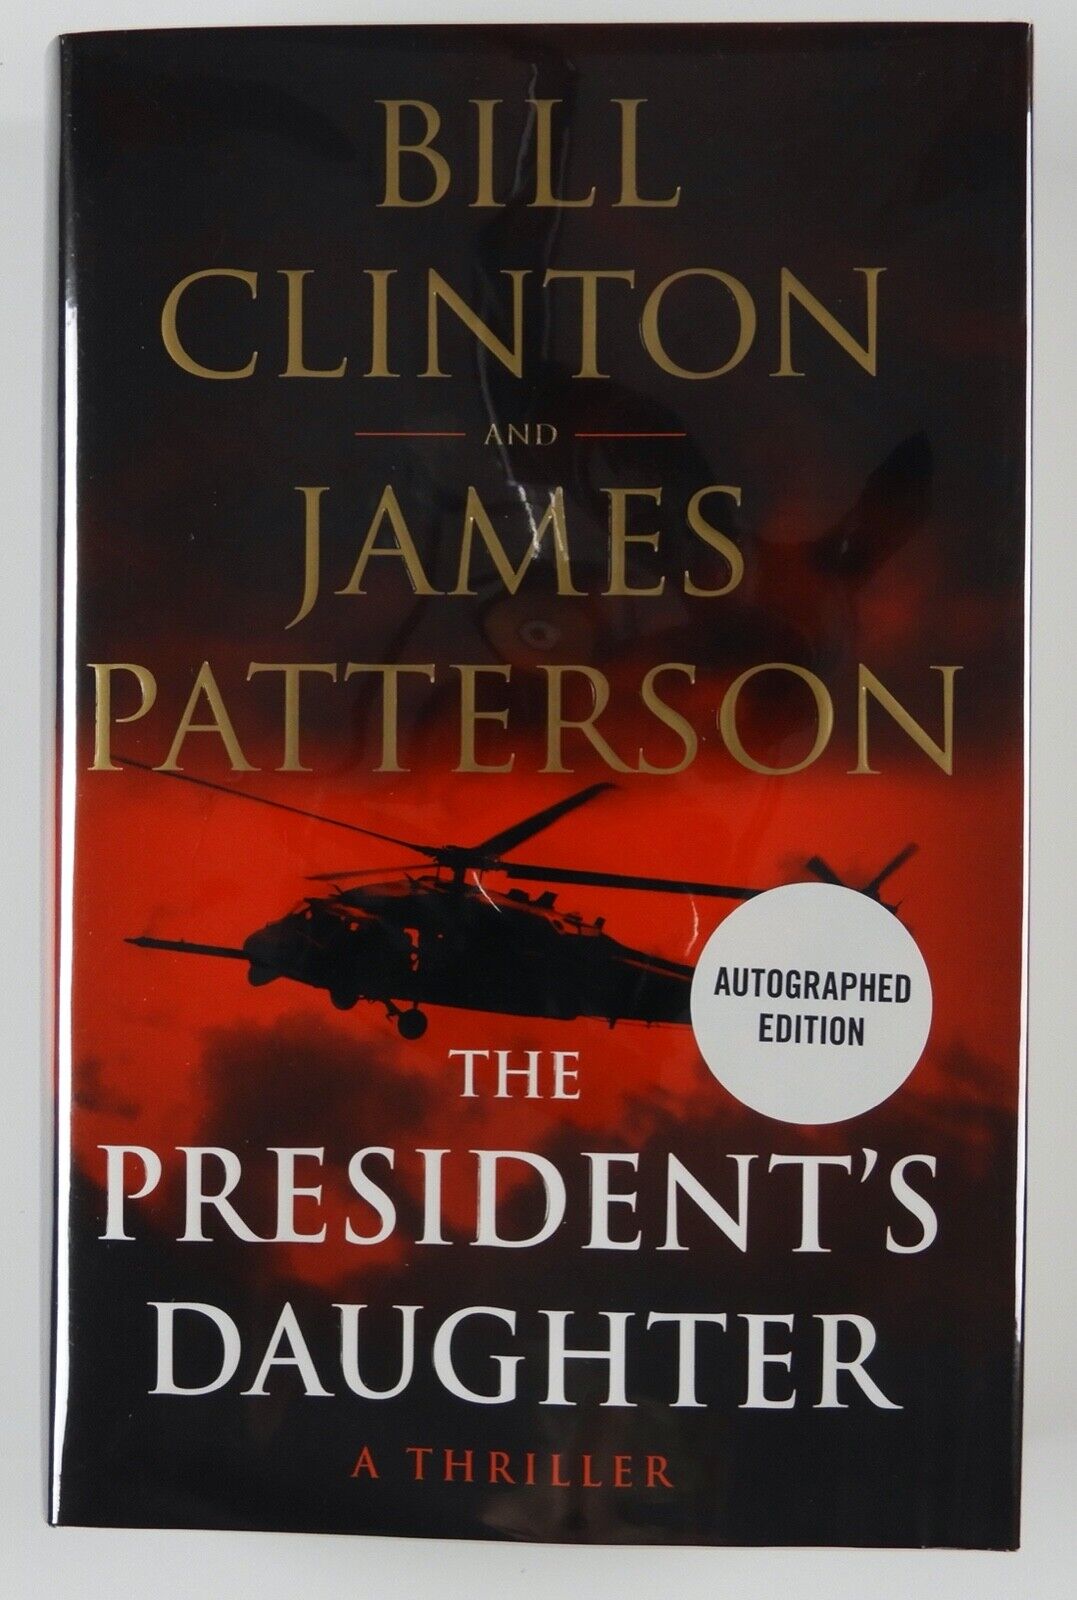 Bill Clinton Signed Autograph Book JSA The President's Daughter James Patterson